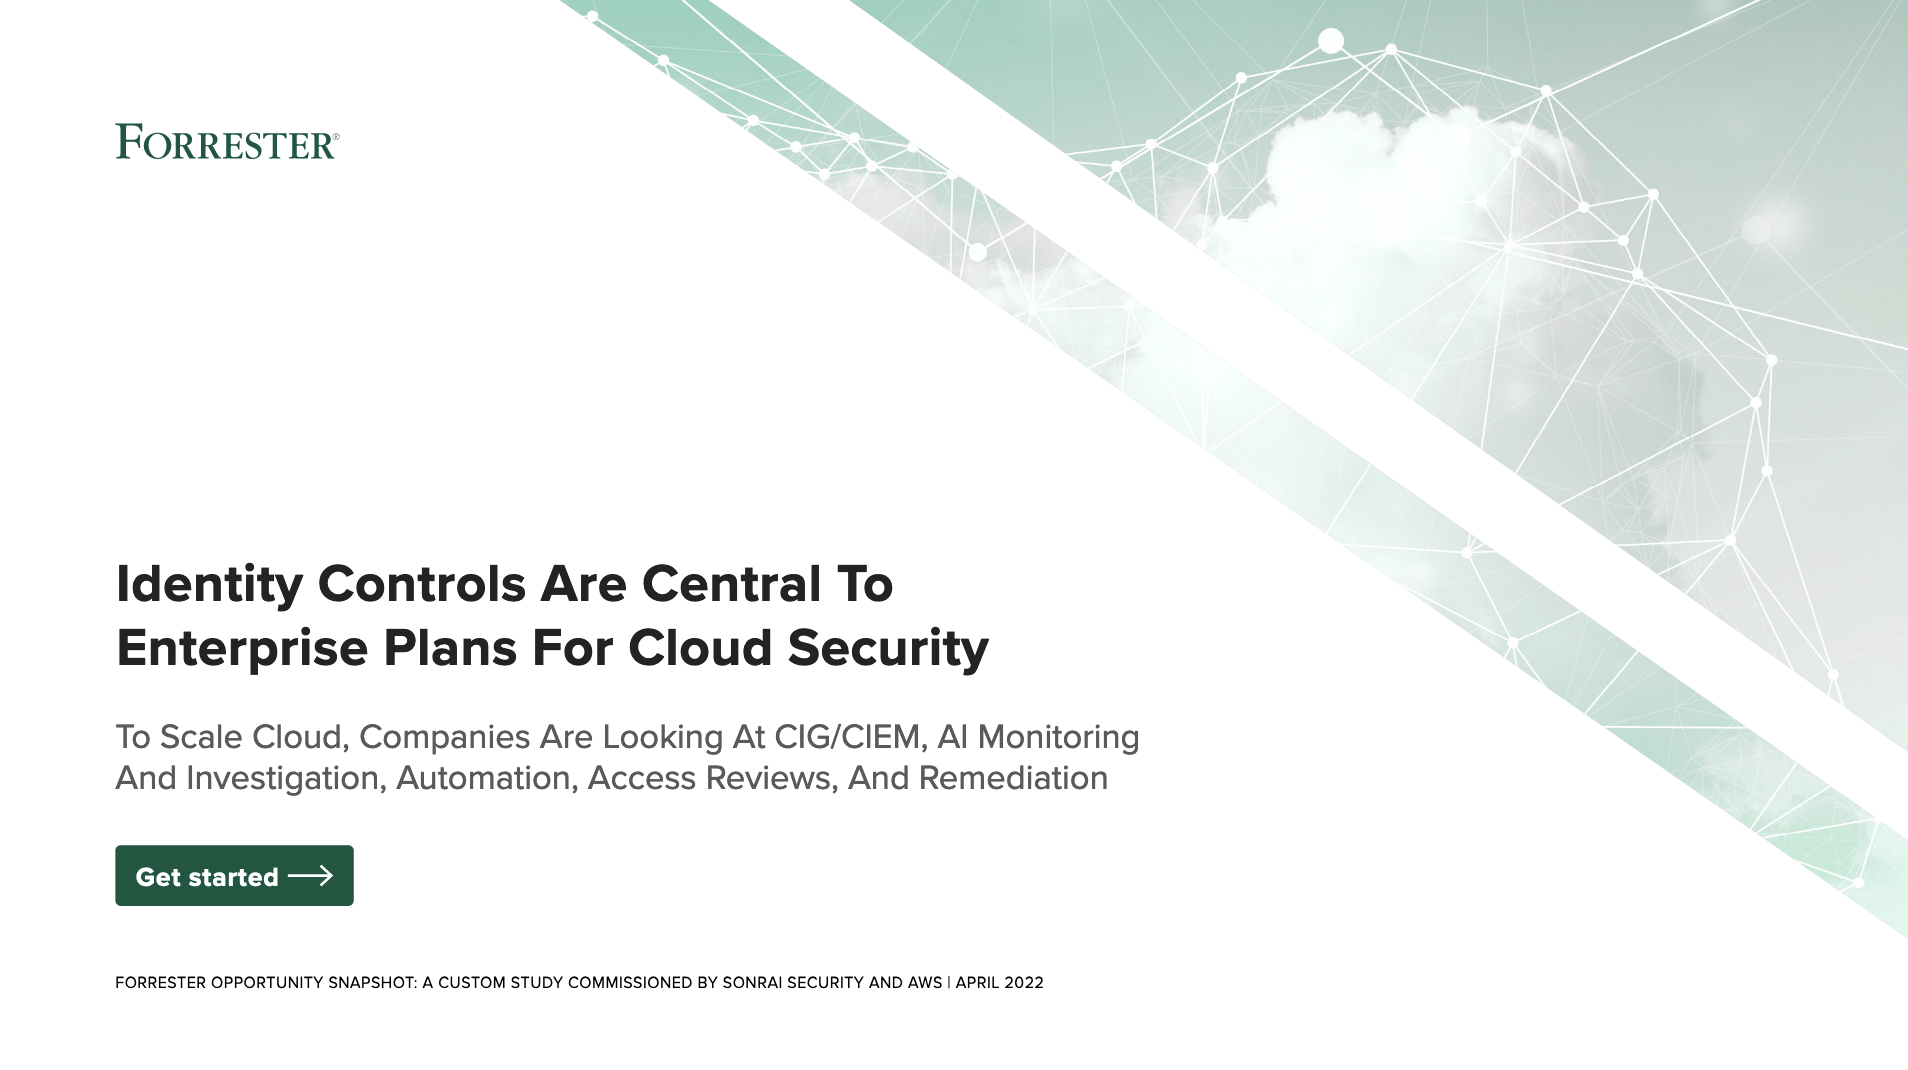 Identity Controls - Identity Controls Are Central To Enterprise Plans For Cloud Security